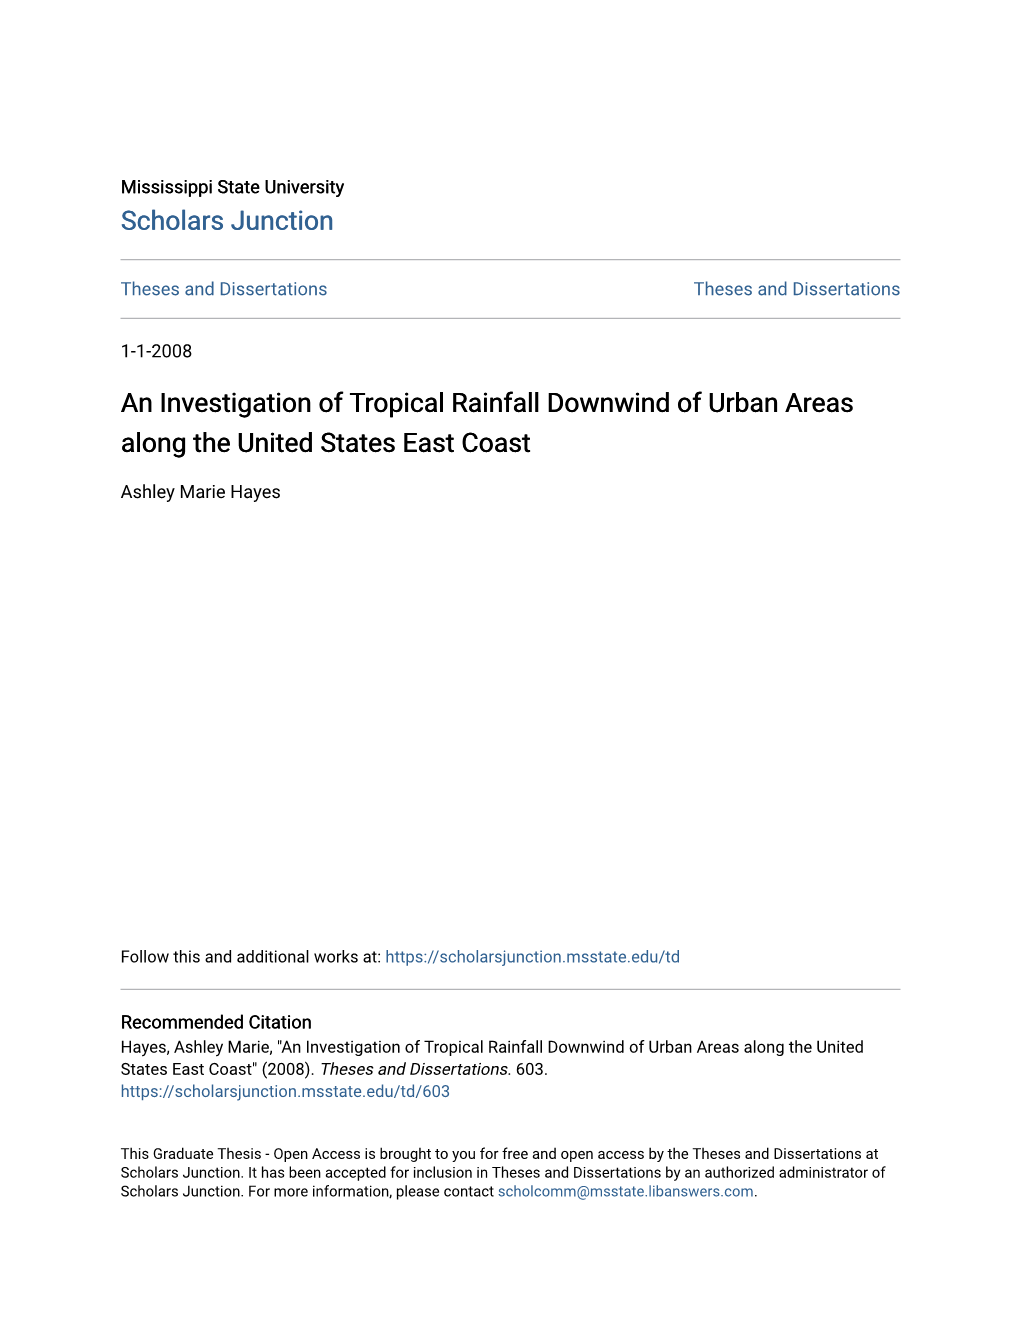 An Investigation of Tropical Rainfall Downwind of Urban Areas Along the United States East Coast